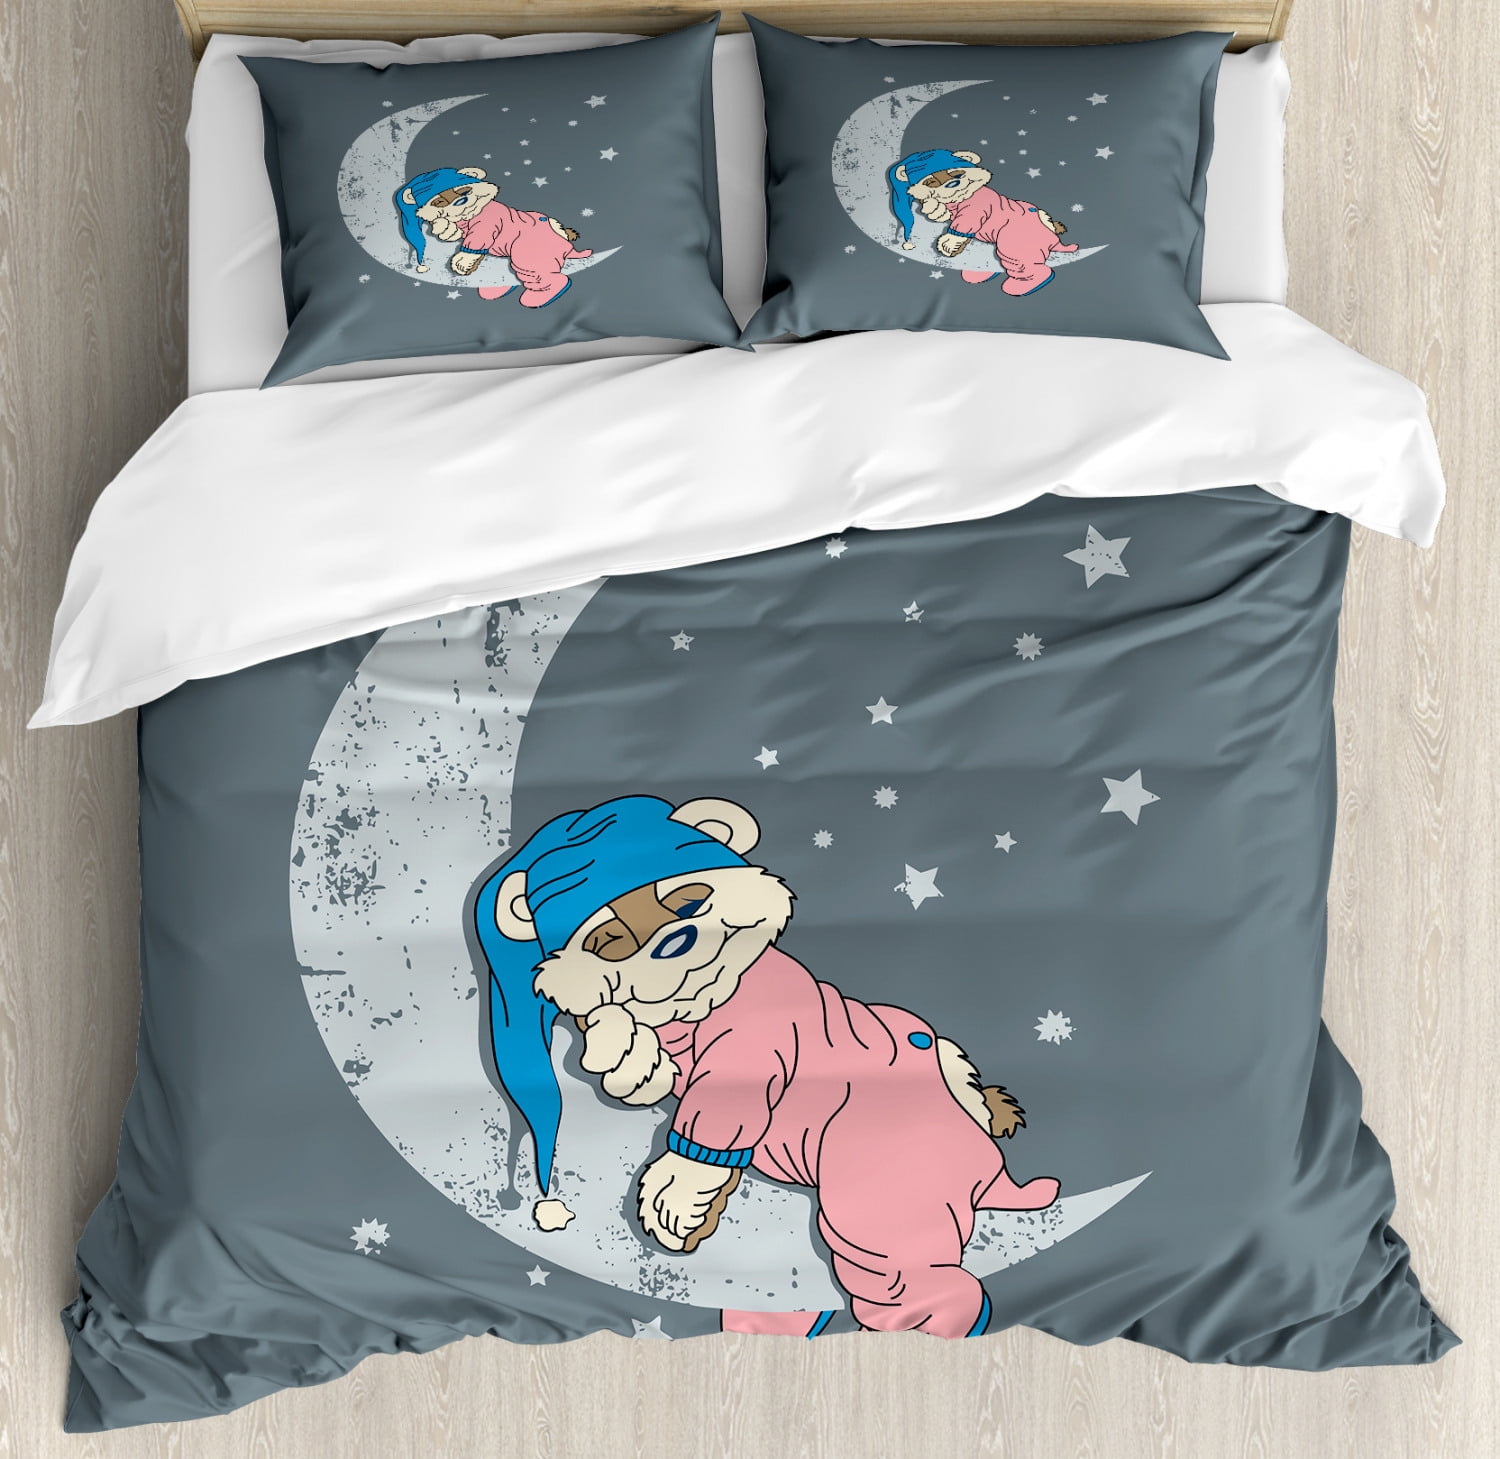 Comforter Cover Queen Bedding Baby Bear Moon Kids Dovet Cover Sets Full Twin Pillowcases Quilt Cover California King Personalized